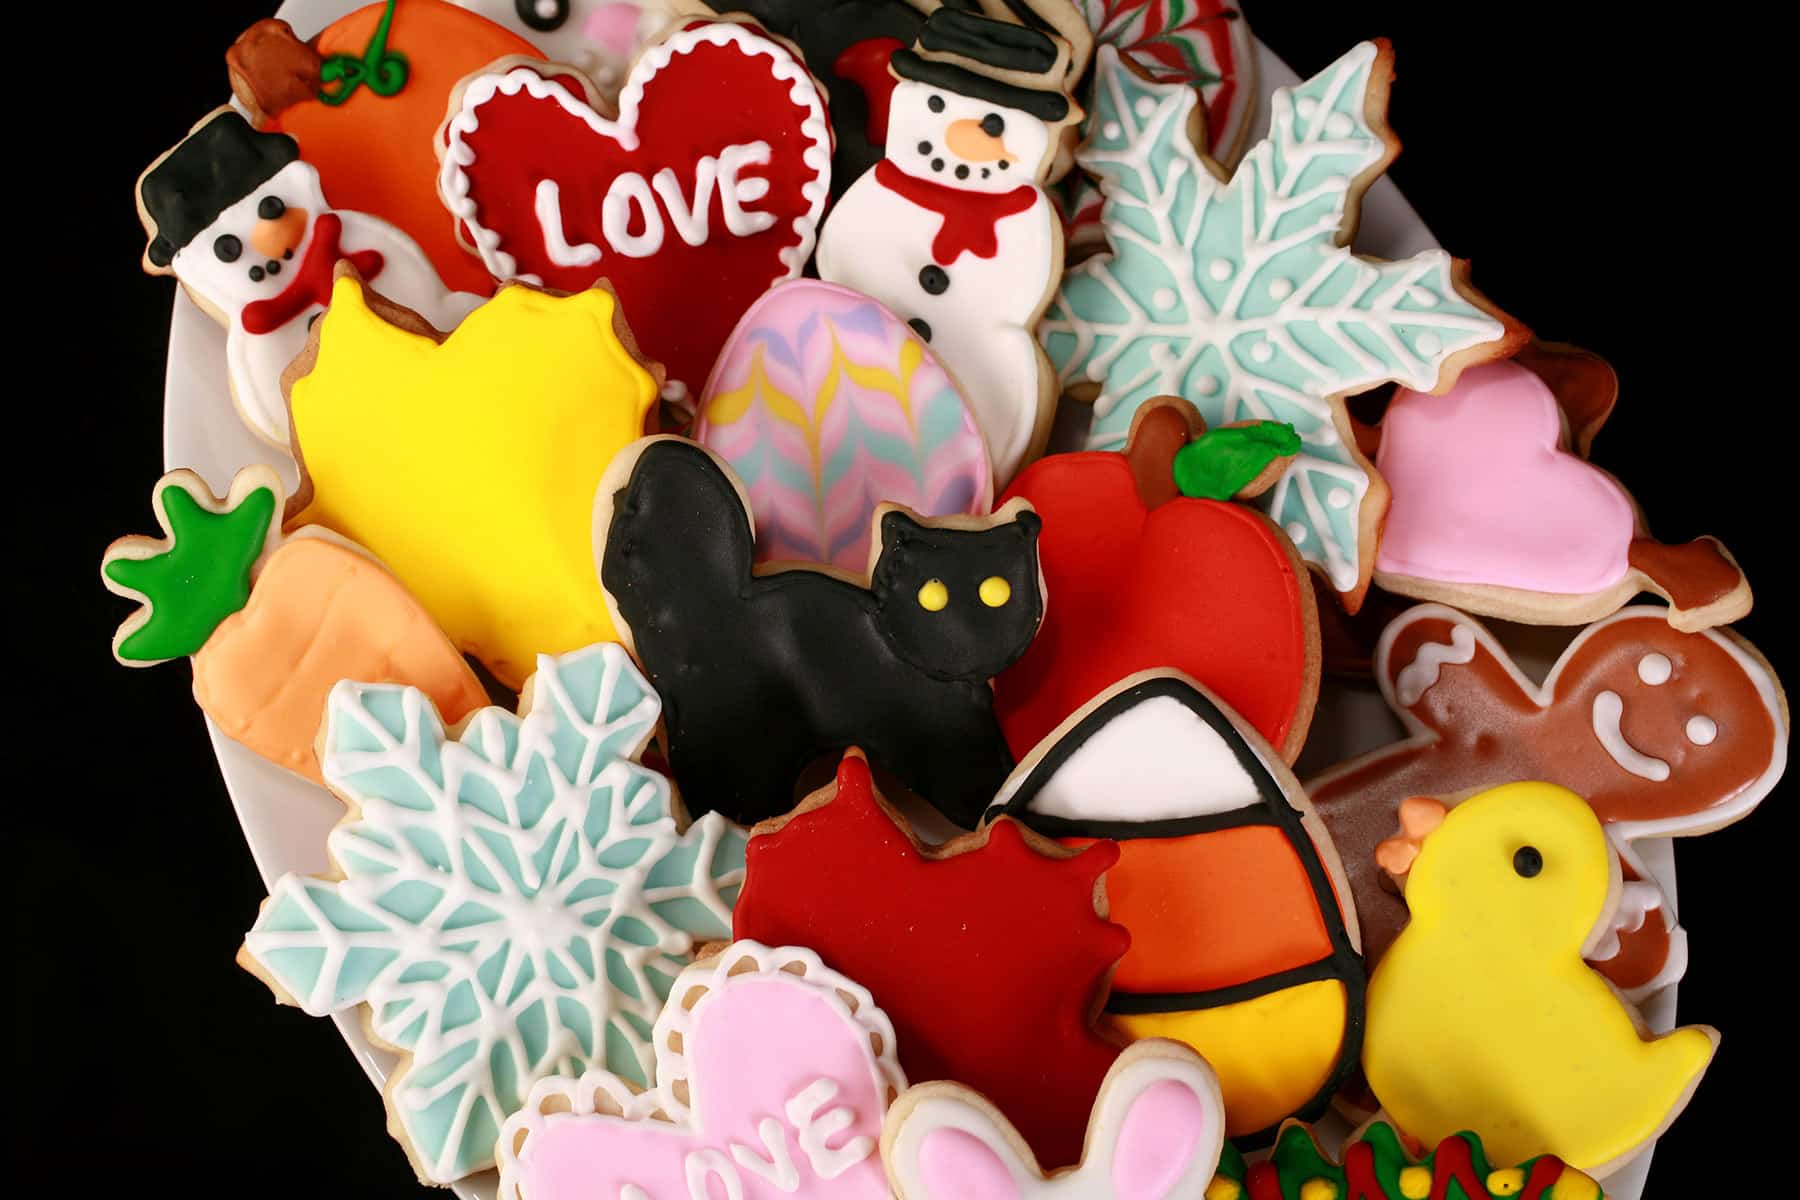 A plate of brightly colored cookies done up in a variety of themes - Halloween, Christmas, Easter, Valentine’s Day, etc.